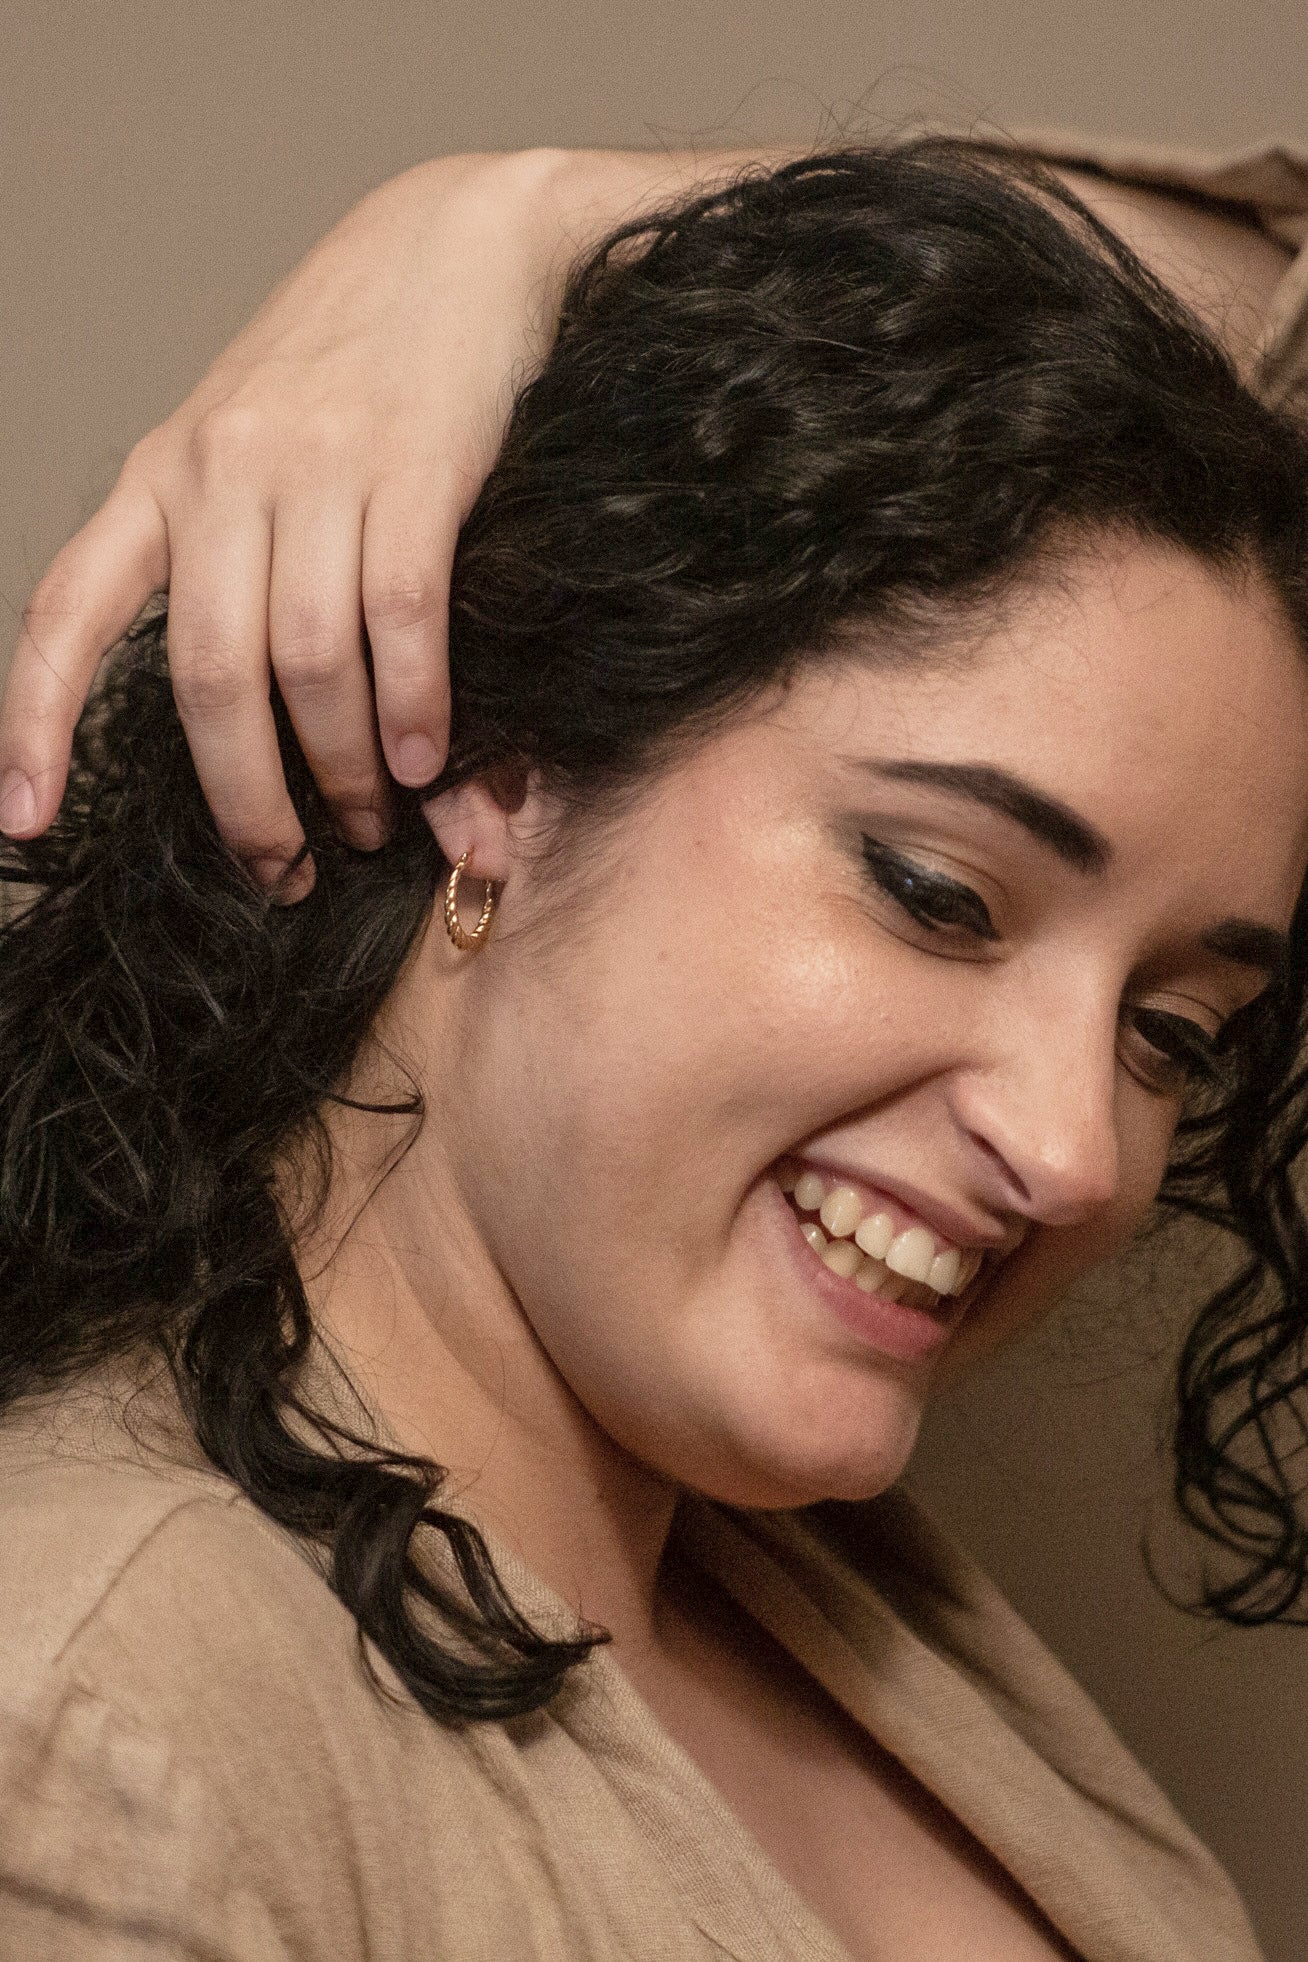 A photo showcasing the happy face of the model, while she pulls her hair back to show the earring.